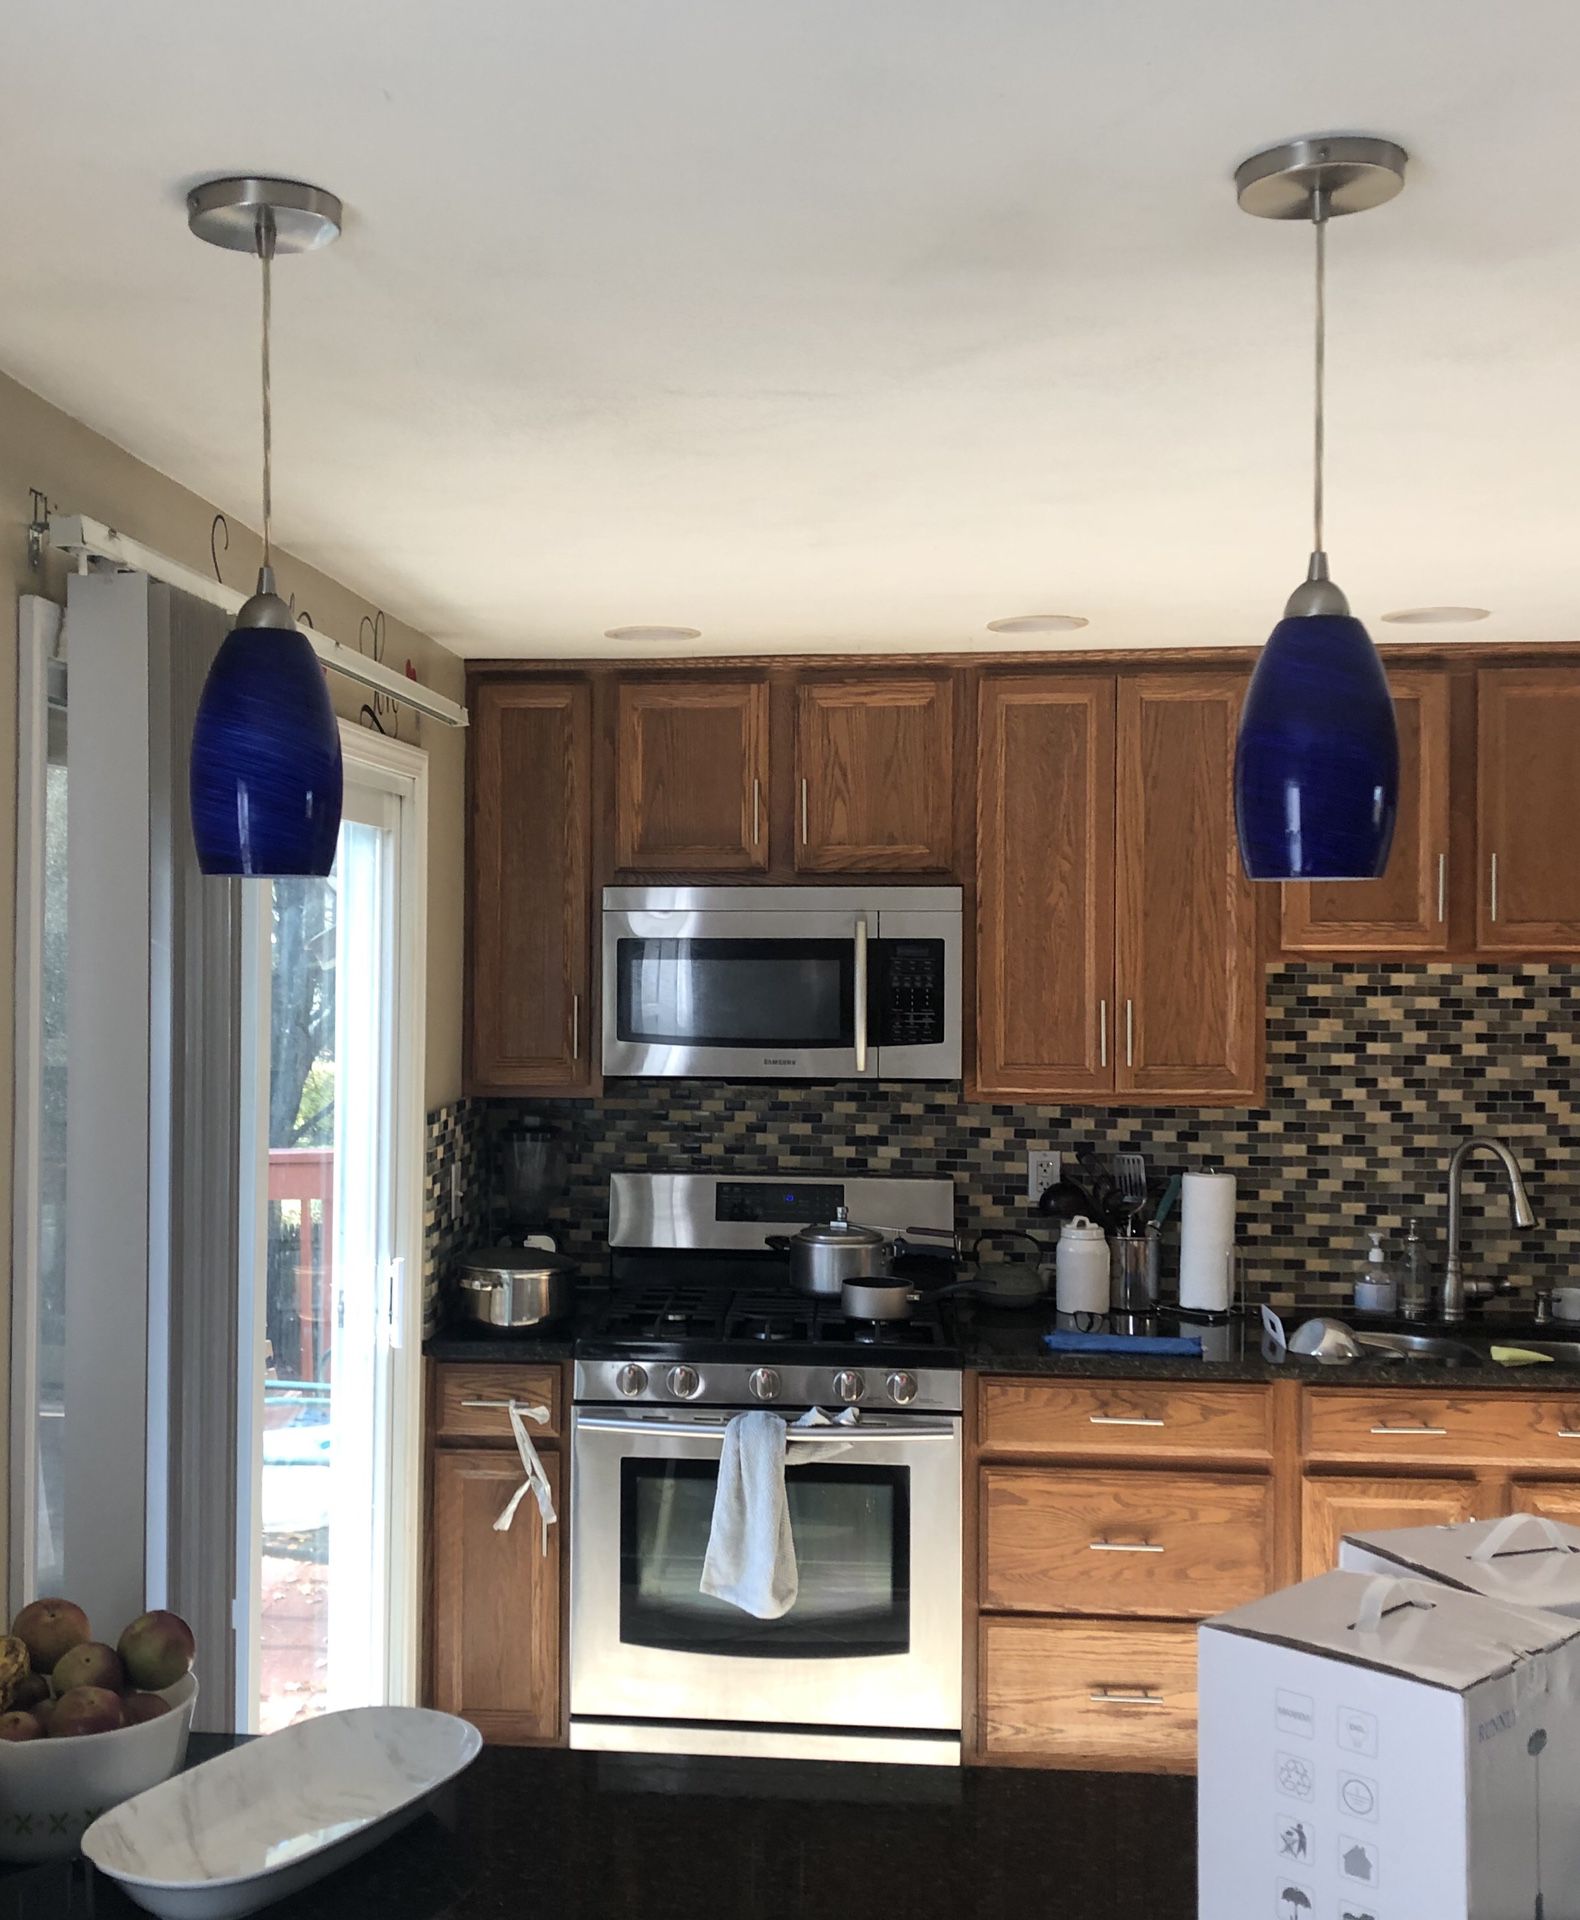 Two blue Pendant hanging lamps